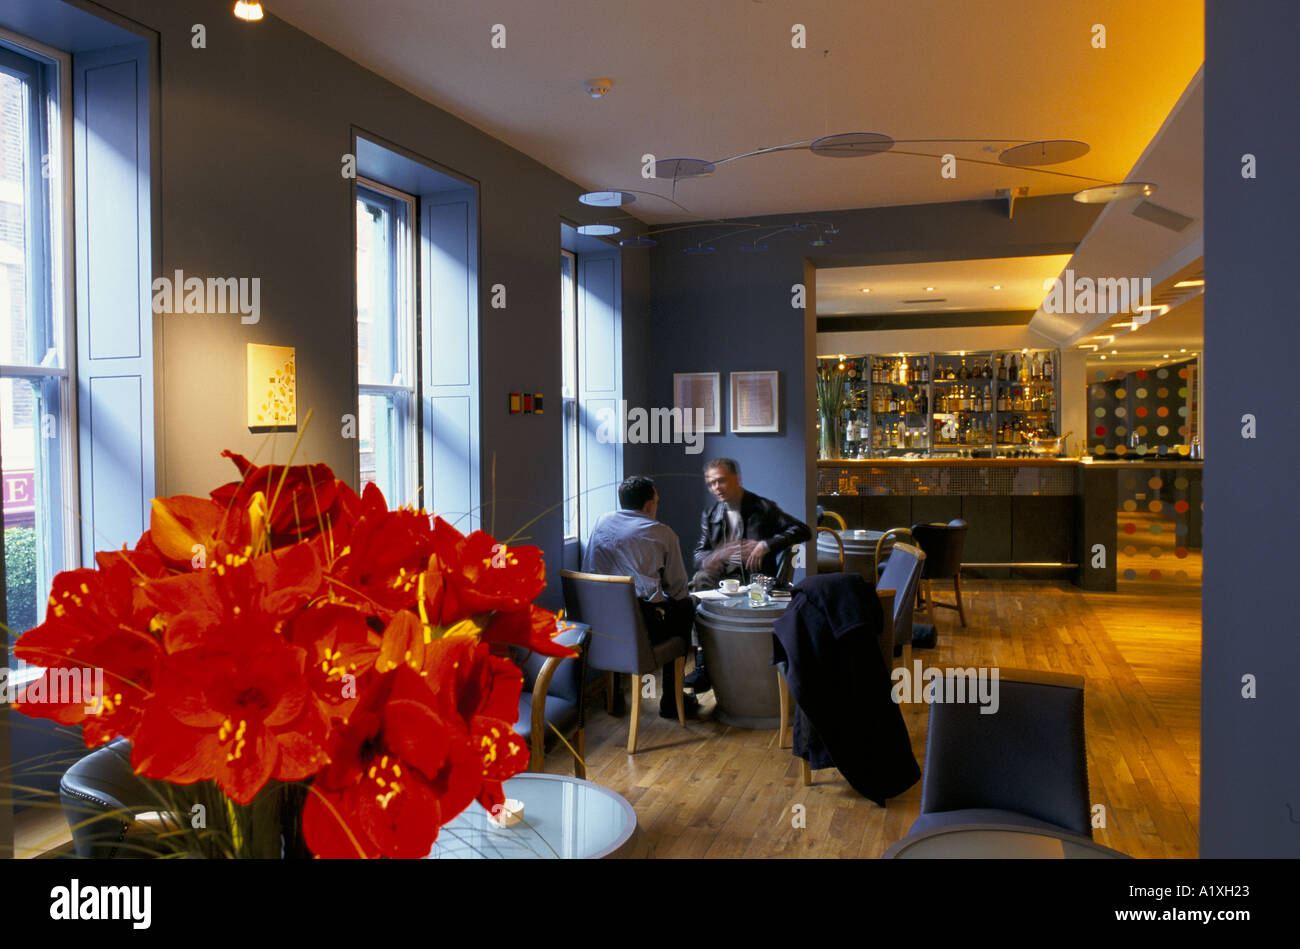 QUO VARDIS RESTAURANT OWNED BY MARCO PIERRE WHITE INTERIOR BY DAMIAN HIRST Stock Photo